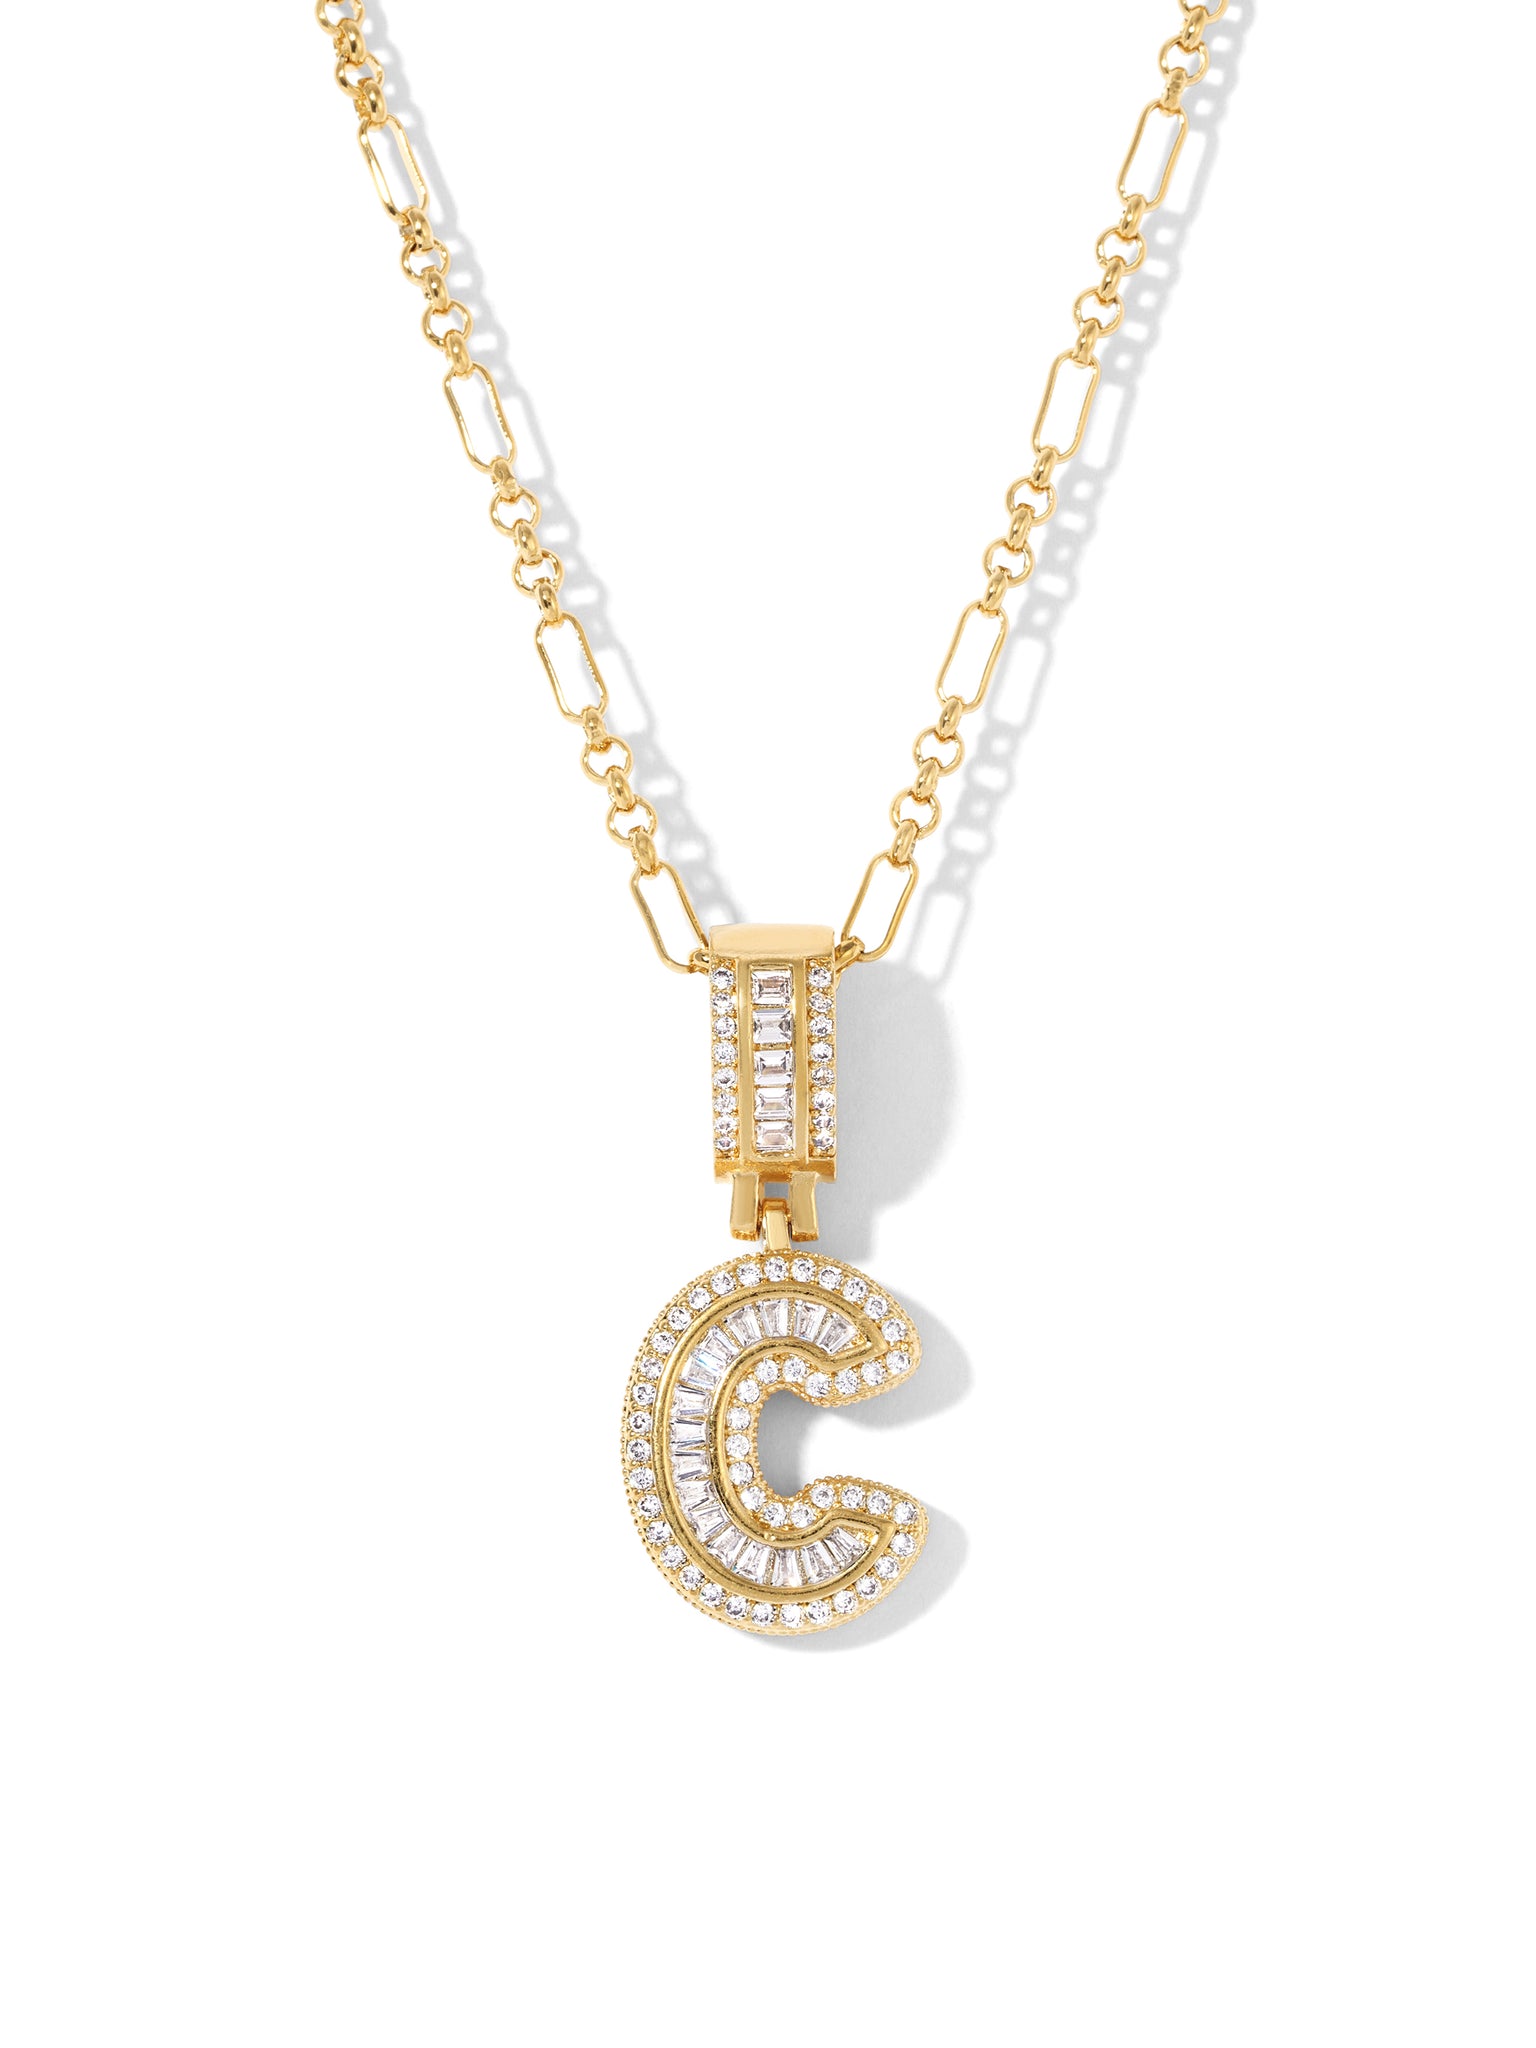 The Evita Initial Necklace